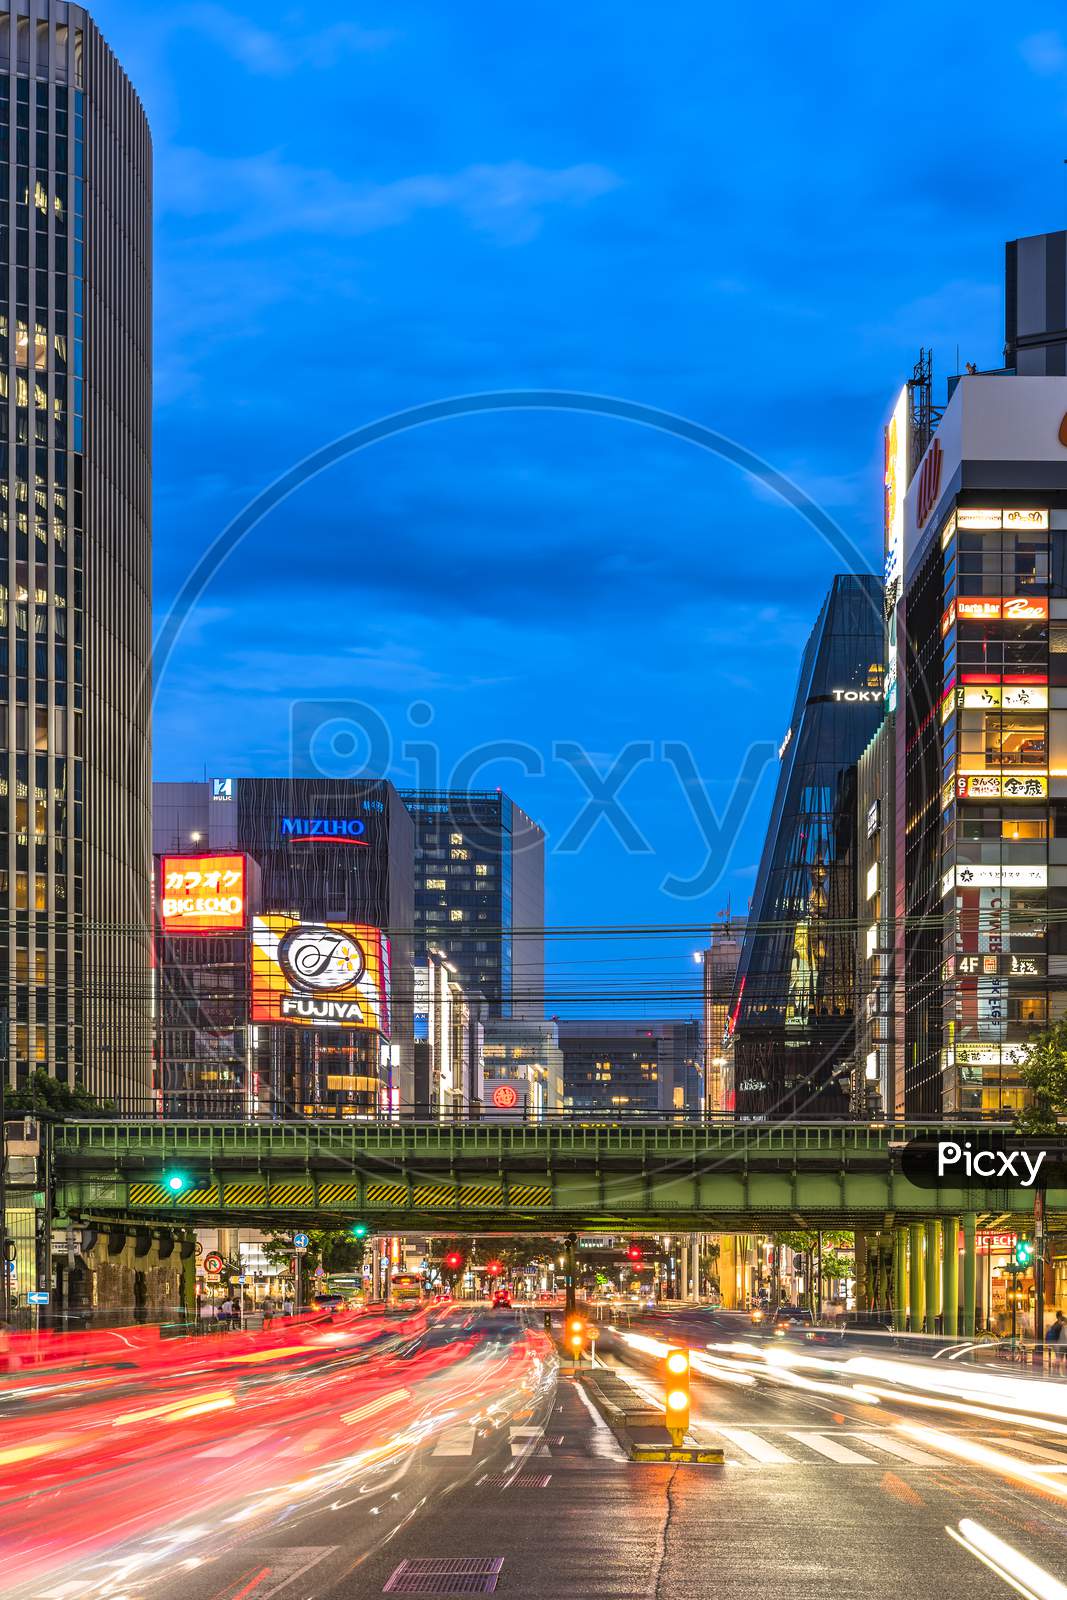 Night View Of The Harumi Street Leading To Ginza District Near To The Entrance Of The Hibiya Park (日比谷公園 Hibiya Kōen) In Chiyoda City Of Tokyo In Japan. Harumi Street Is Leading From The Iwaida Bridge Intersection In Chiyoda Ward To The Shinonome Intersection In Koto Ward.